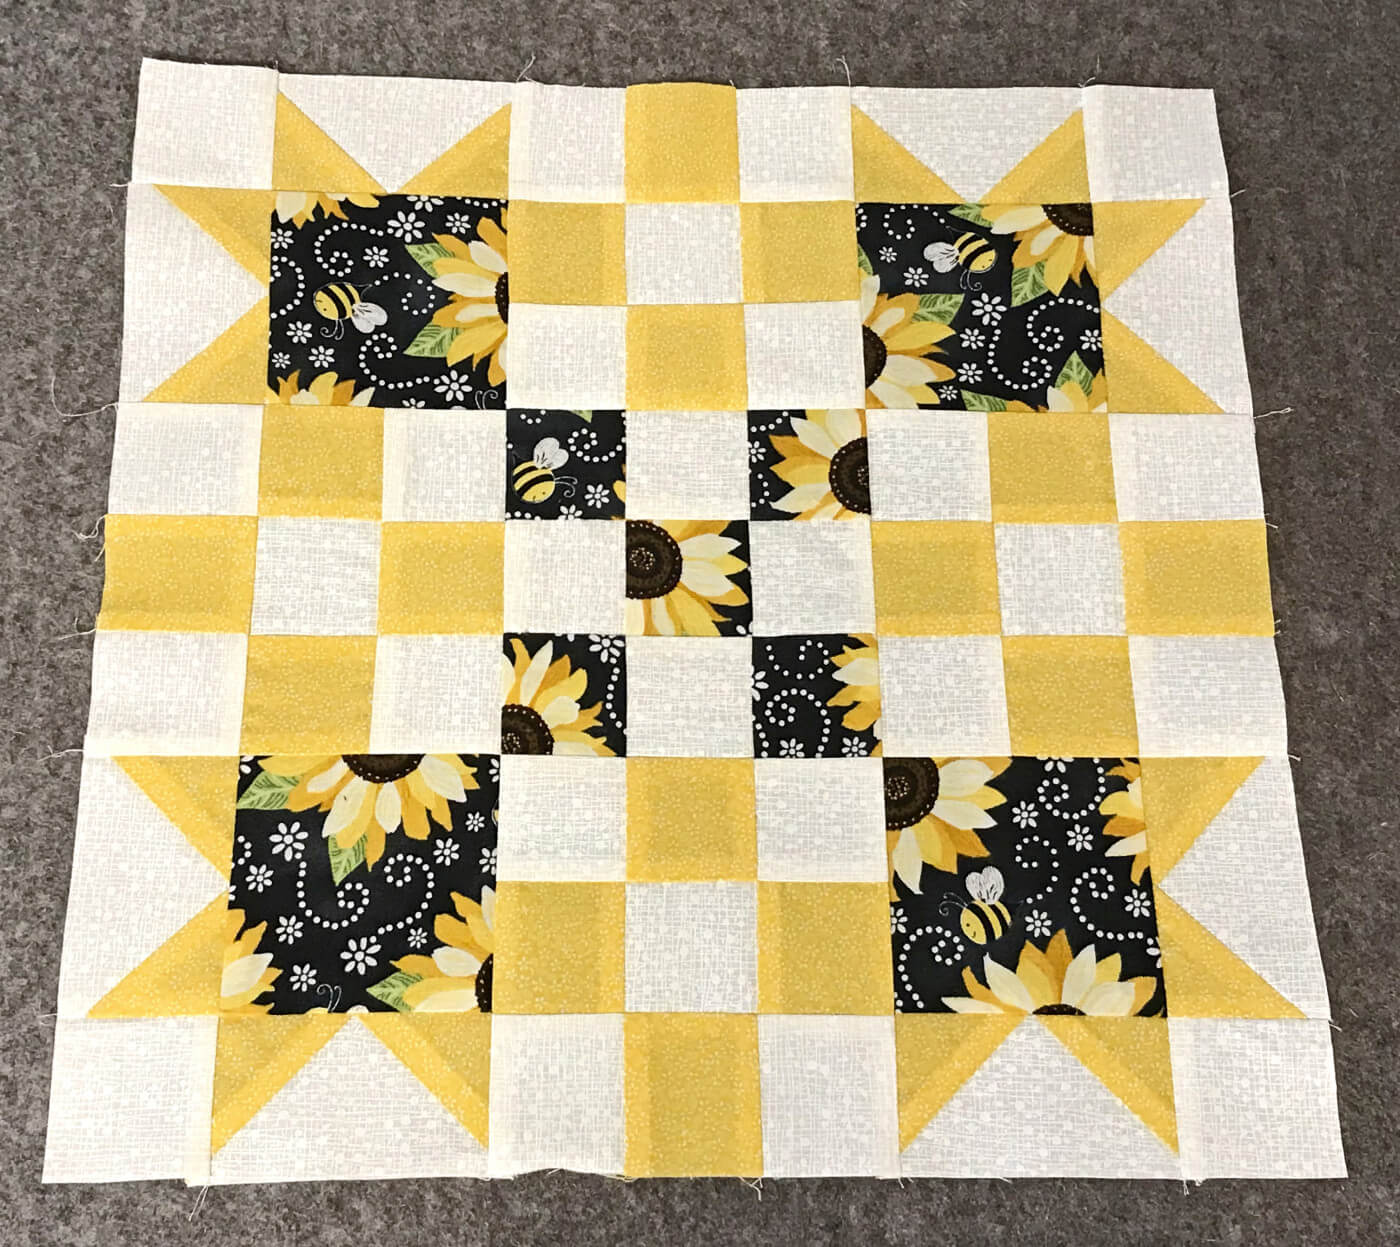 quilt block with yellow black and white 9 patch blocks and flying geese blocks in the corners